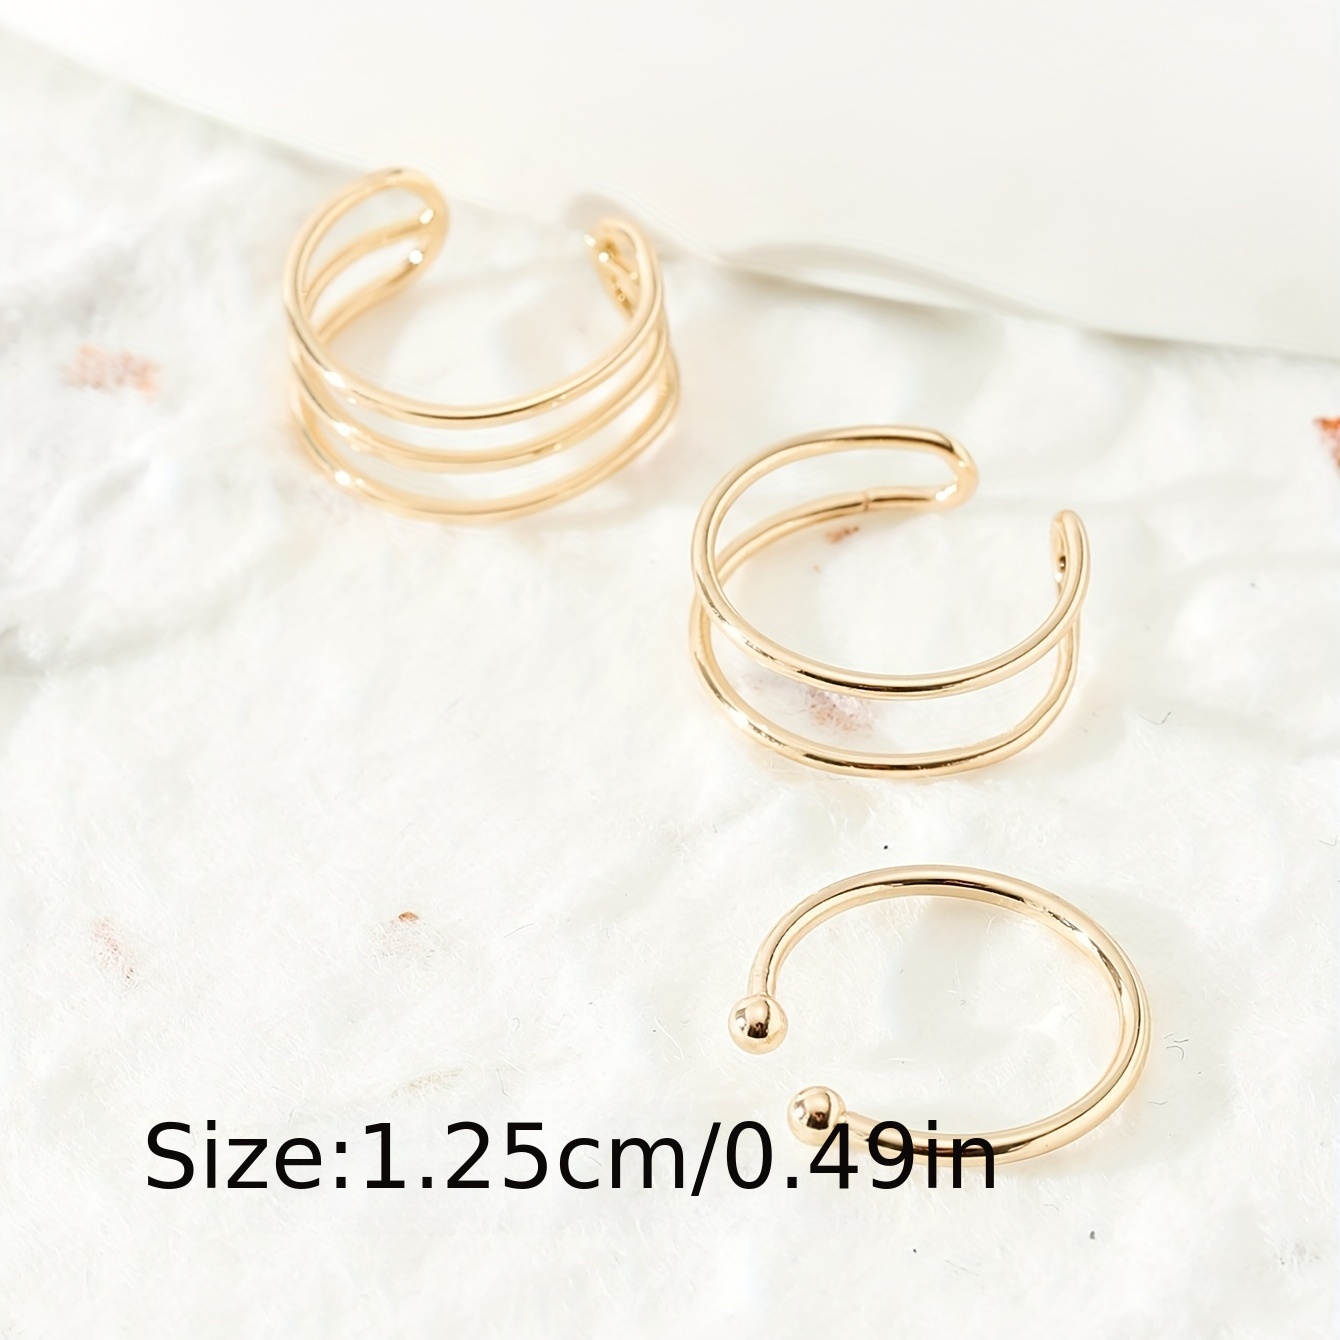 Dropship 9PCS Toe Rings For Women Summer Beach Open Toe Ring With